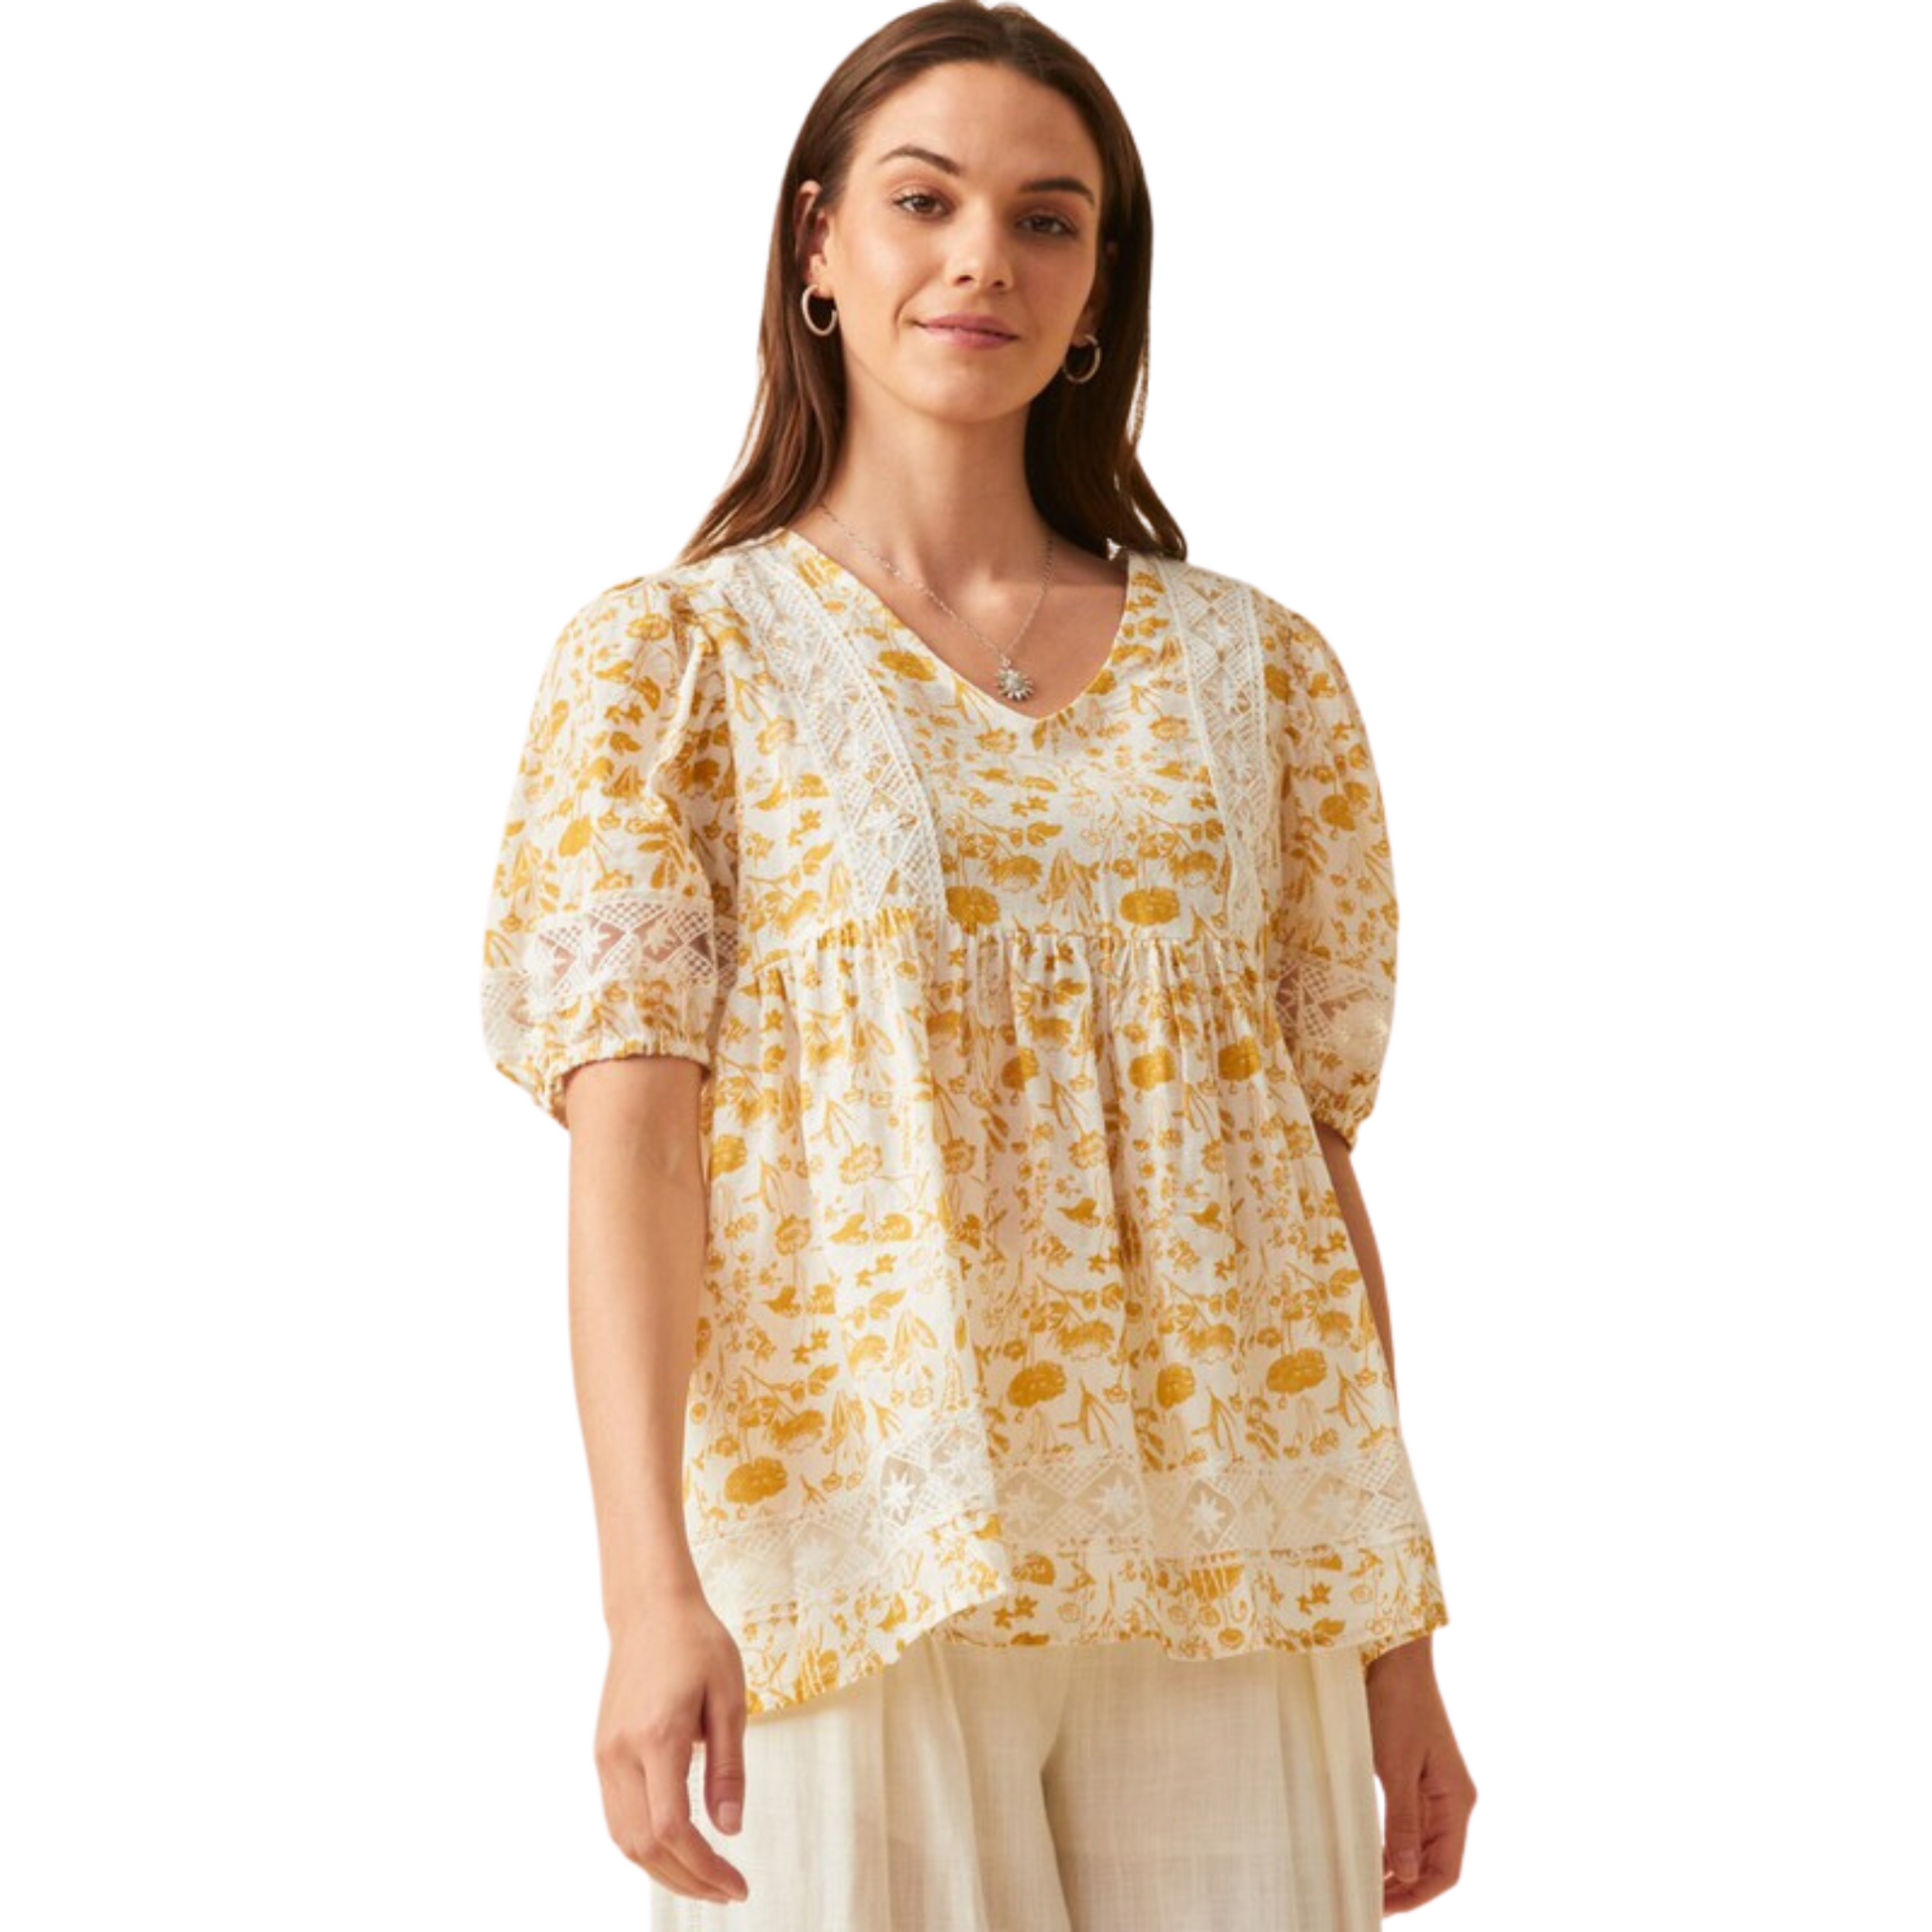 This Floral Lace Puff Sleeve Tunic Top is a stylish combination of modern and classic - featuring a yellow and white floral design, this babydoll top with puff sleeves is perfect for a daytime or evening look. The timeless lace detail is sure to make it a wardrobe staple.